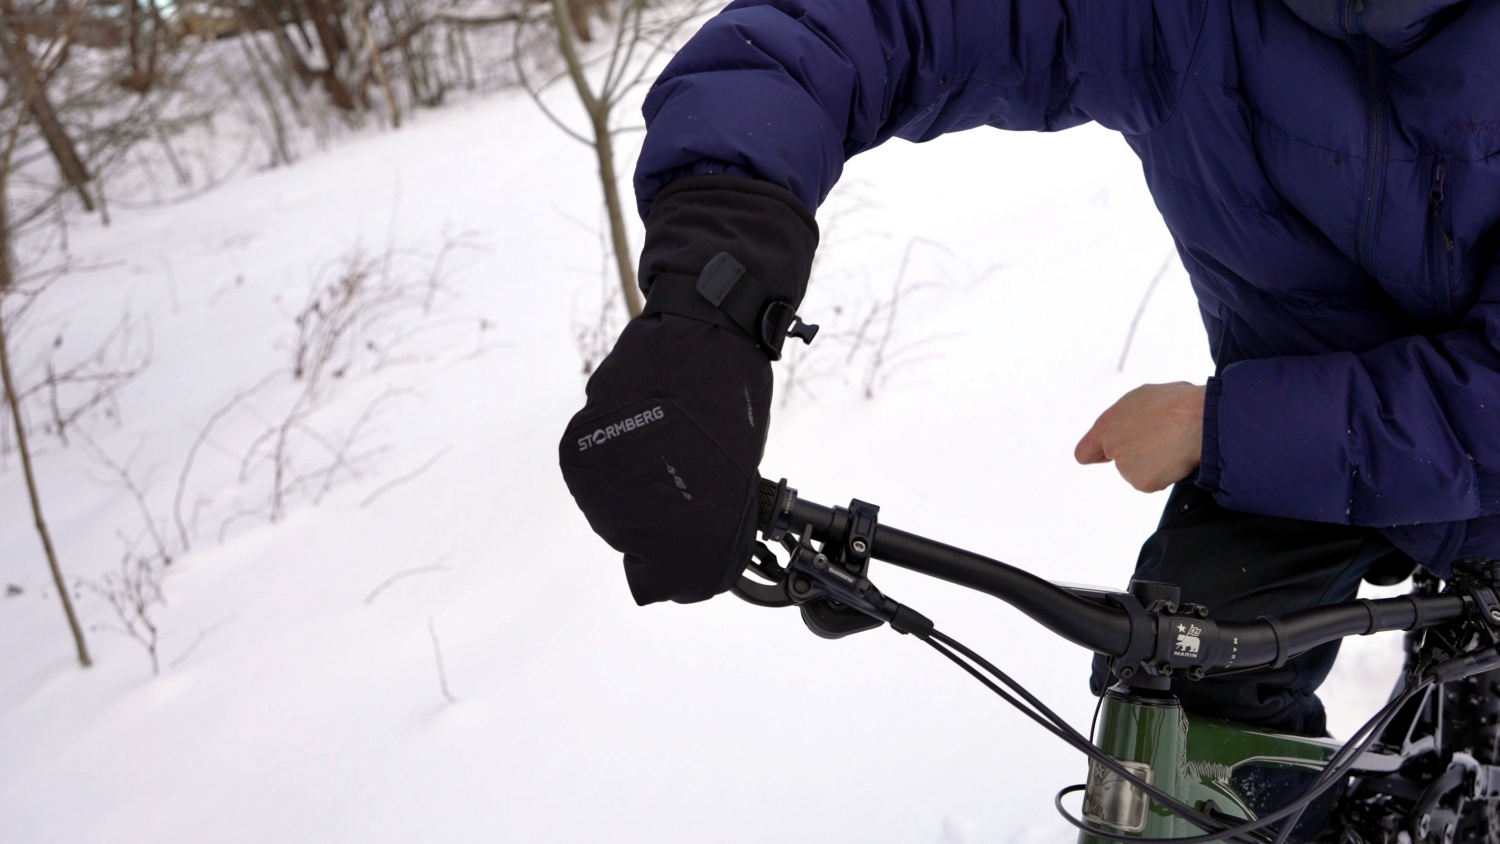 It's not easy operating the brake lever using thin mittens.